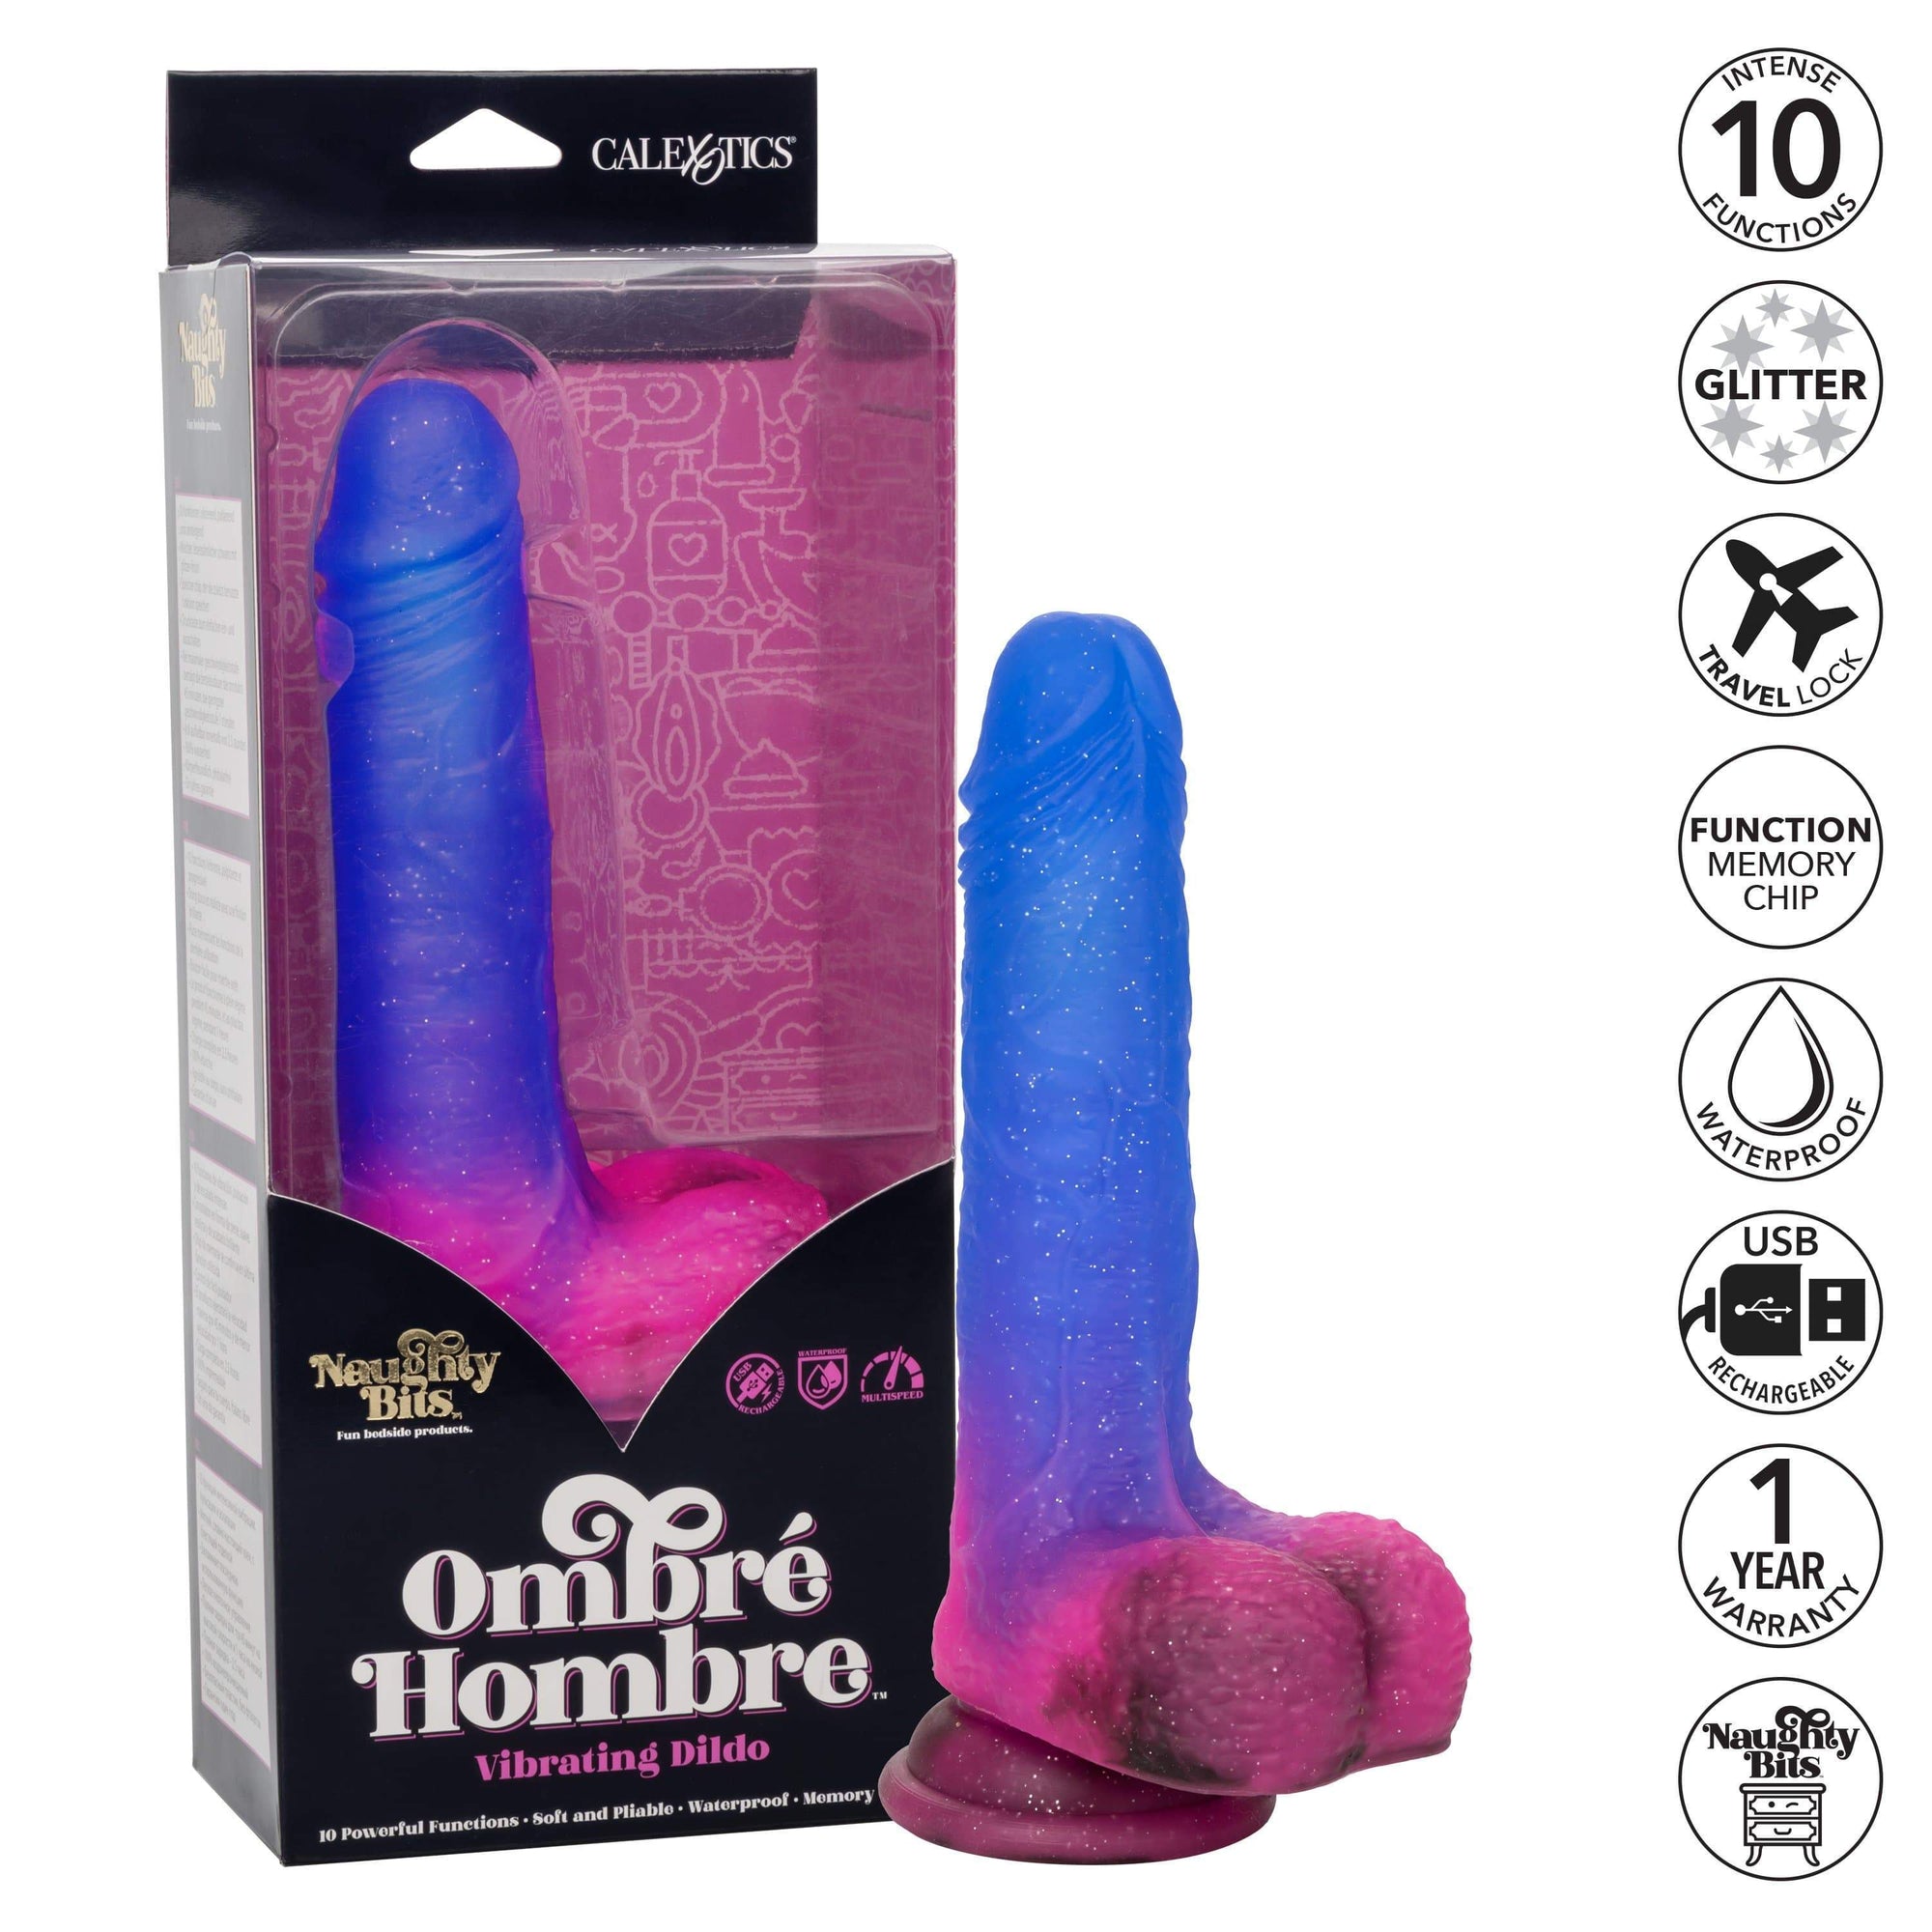 California Exotics - Naughty Bits Ombre Hombre Vibrating Dildo (Purple) Realistic Dildo with suction cup (Vibration) Rechargeable Durio Asia